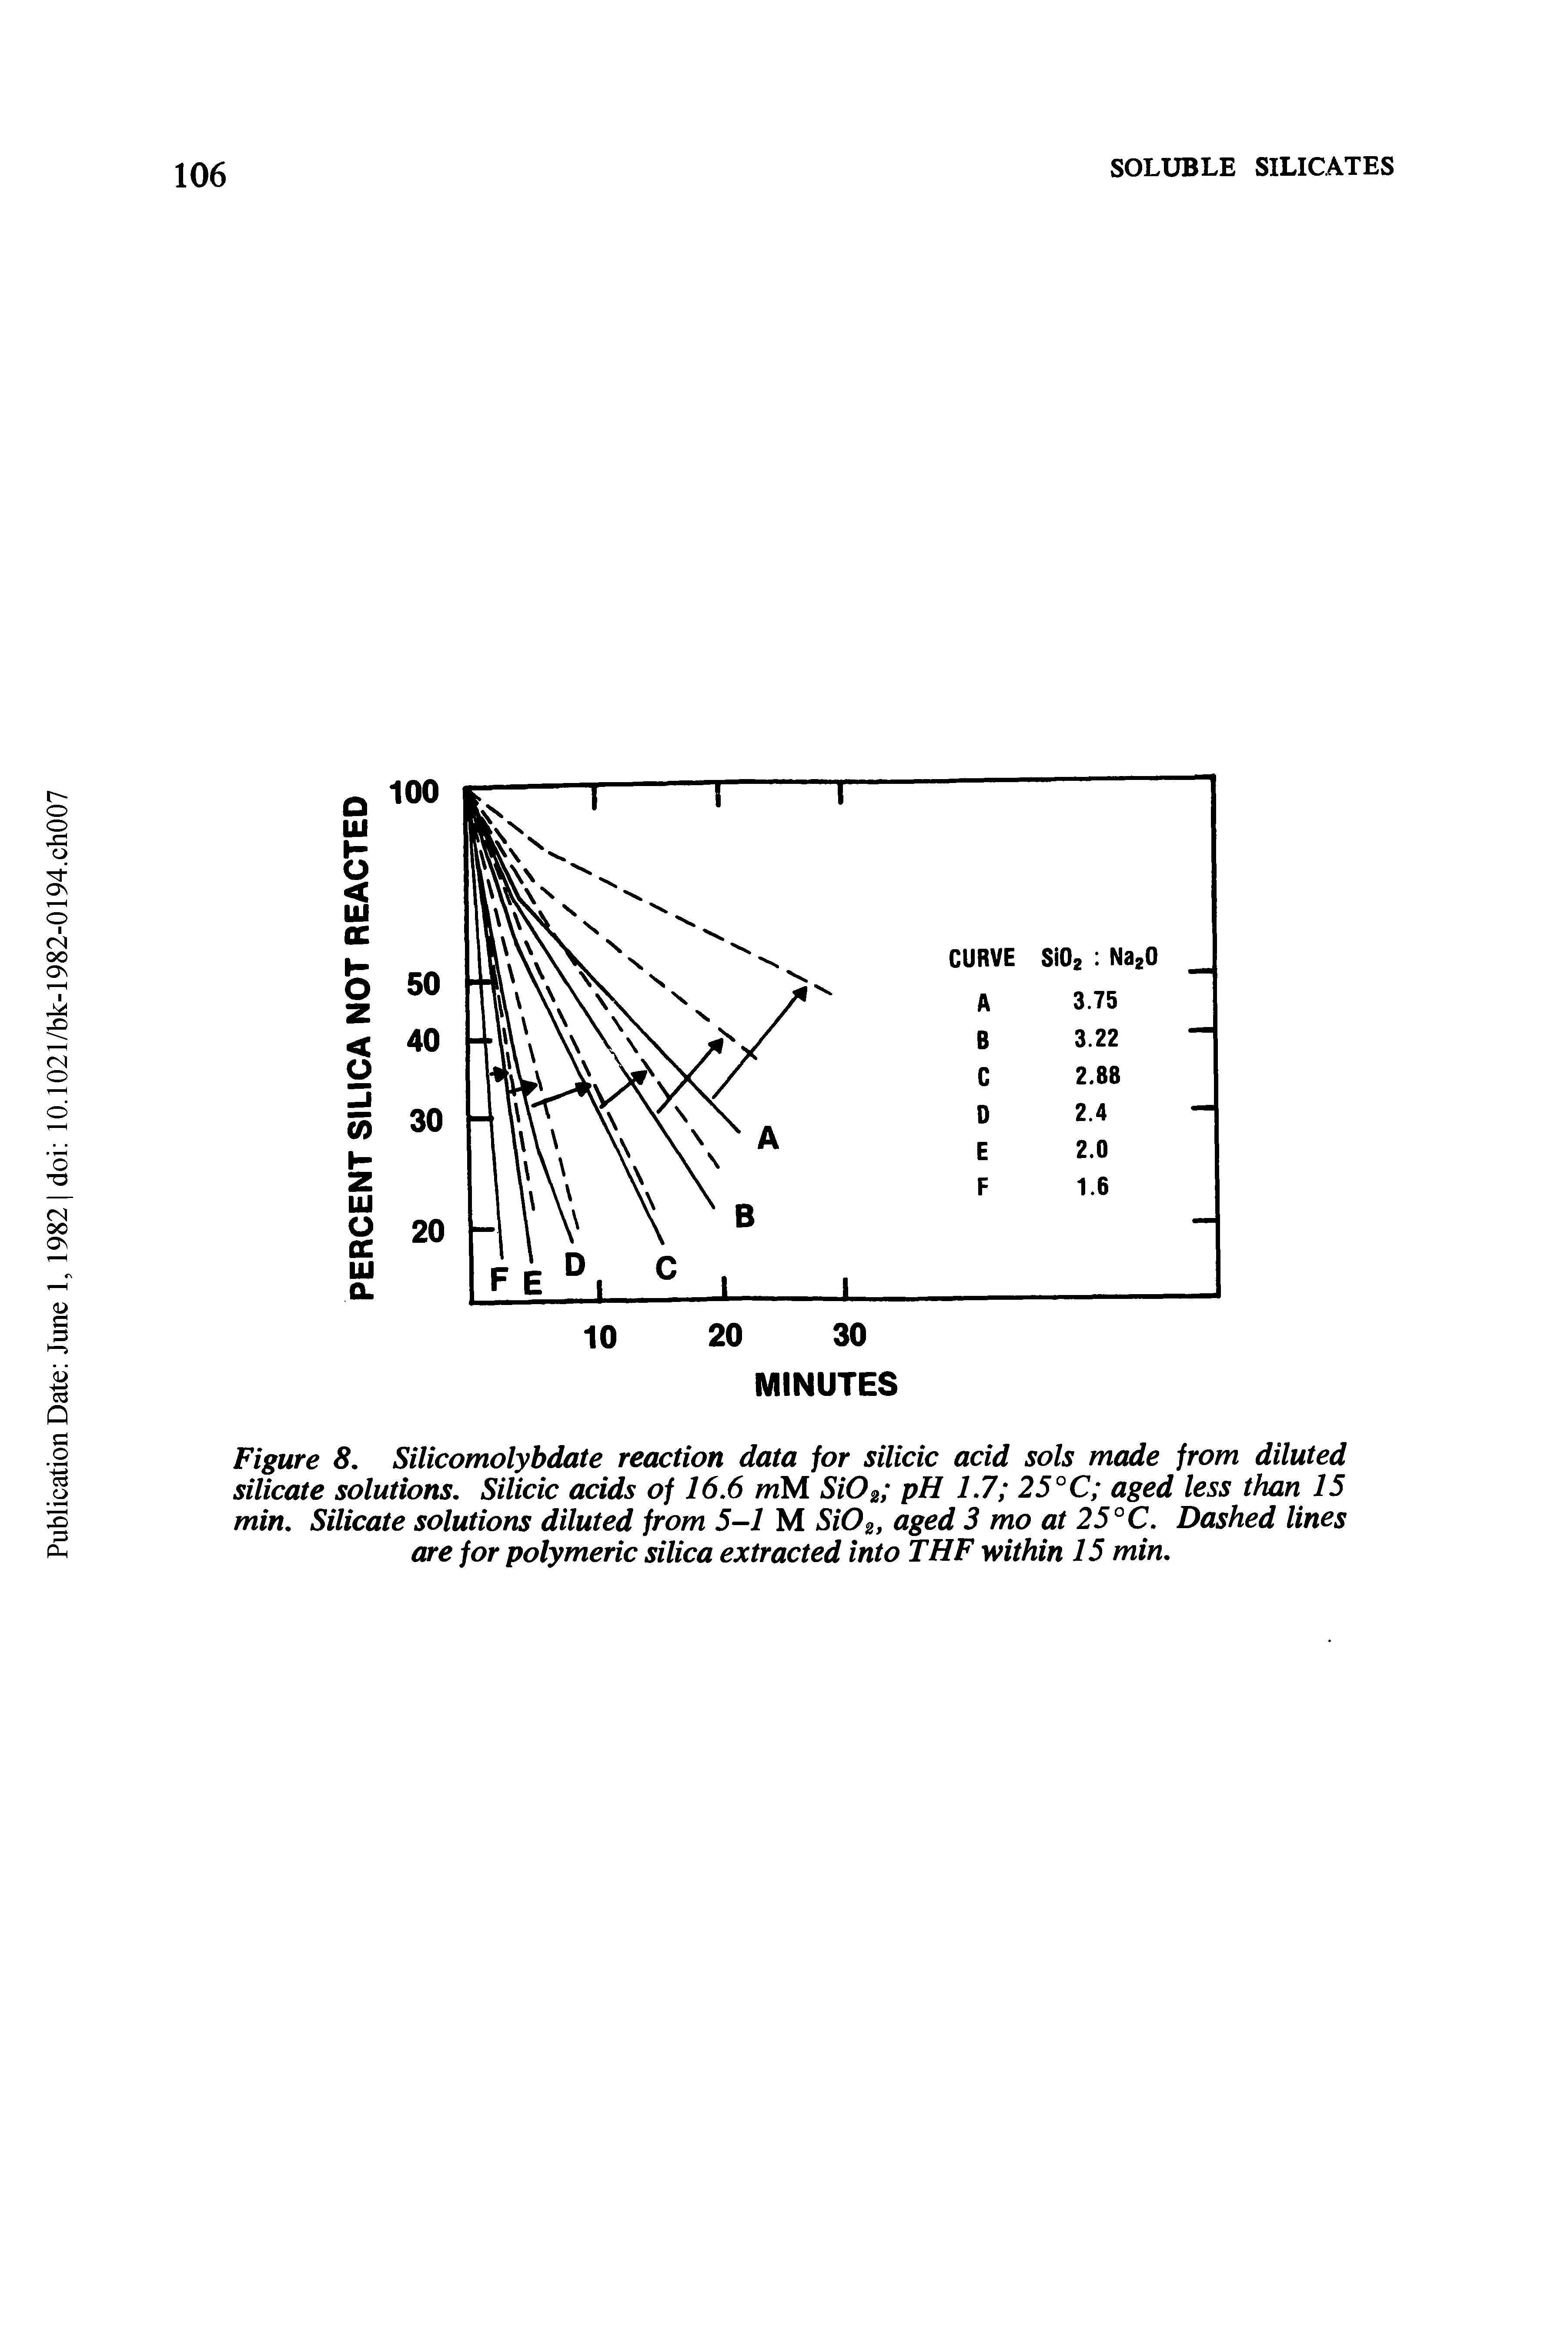 Figure 8. Silicomolybdate reaction data for silicic acid sols made from diluted silicate solutions. Silicic acids of 16.6 mM S/Oj pH 1.7 25°C aged less than 15 min. Silicate solutions diluted from 5-1 M SiOz, aged 3 mo at 25°C. Dashed lines are for polymeric silica extracted into THF within 15 min.